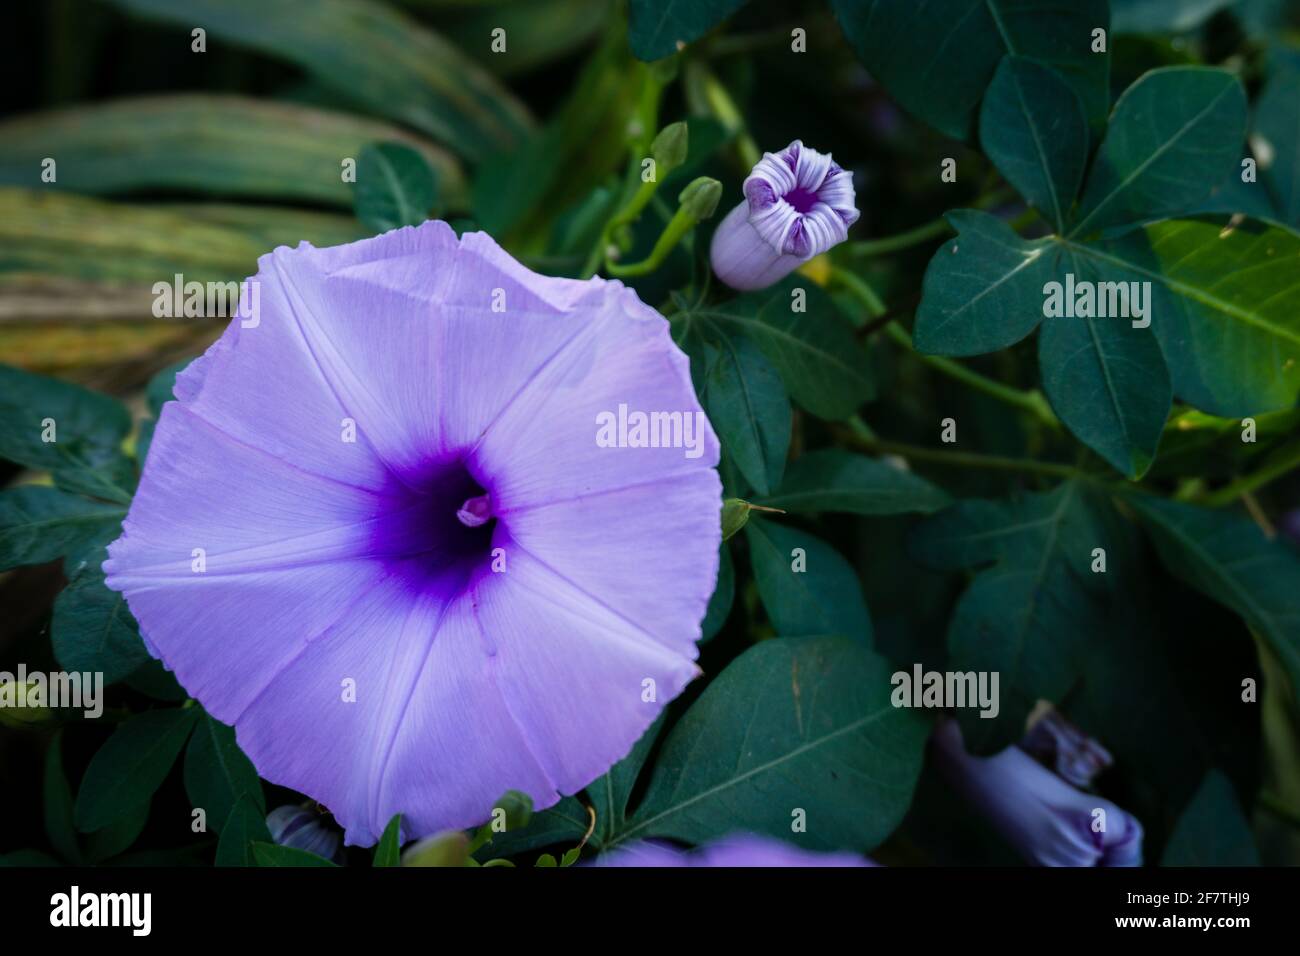 Ipomoea cairica is a vining, herbaceous, perennial plant with palmate leaves and large, showy white to lavender flowers. A species of morning glory, i Stock Photo